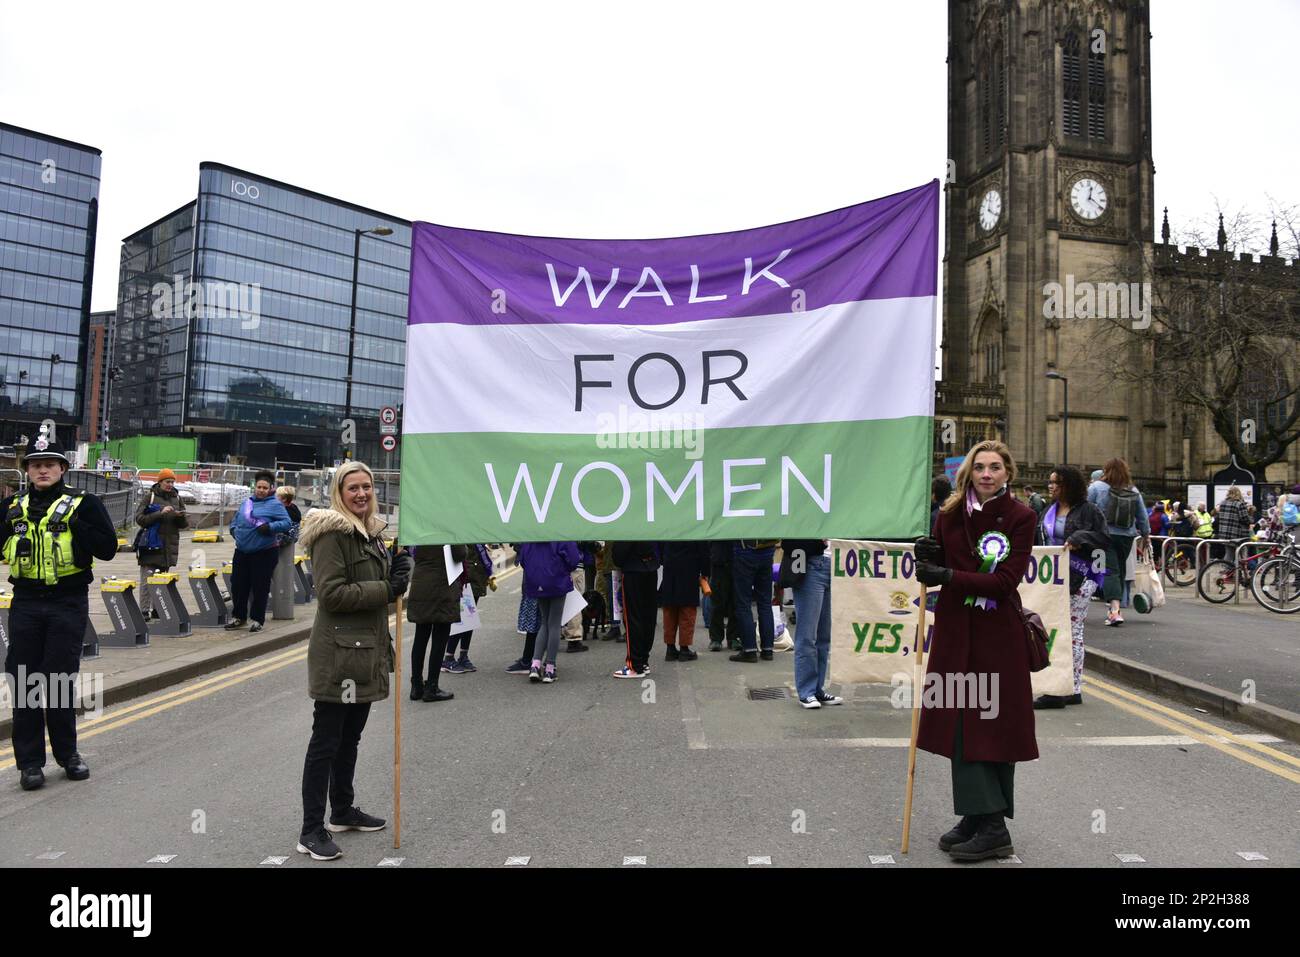 Manchester, UK, 4th March, 2023. 'Walk for Women' banner. Walk for Women celebrates the forthcoming International Women’s Day 2023, Manchester, UK. This year’s global theme: ‘Embrace Equity’ focusses on how people can create an inclusive world. This event is organised by Manchester City Council and is part of Manchester’s International Women’s Day celebrations which will take place across the city in March.  This is the sixth year the Council has held the Walk for Women. International Women’s Day, celebrated globally, is on Wednesday 8th March. Credit: Terry Waller/Alamy Live News Stock Photo